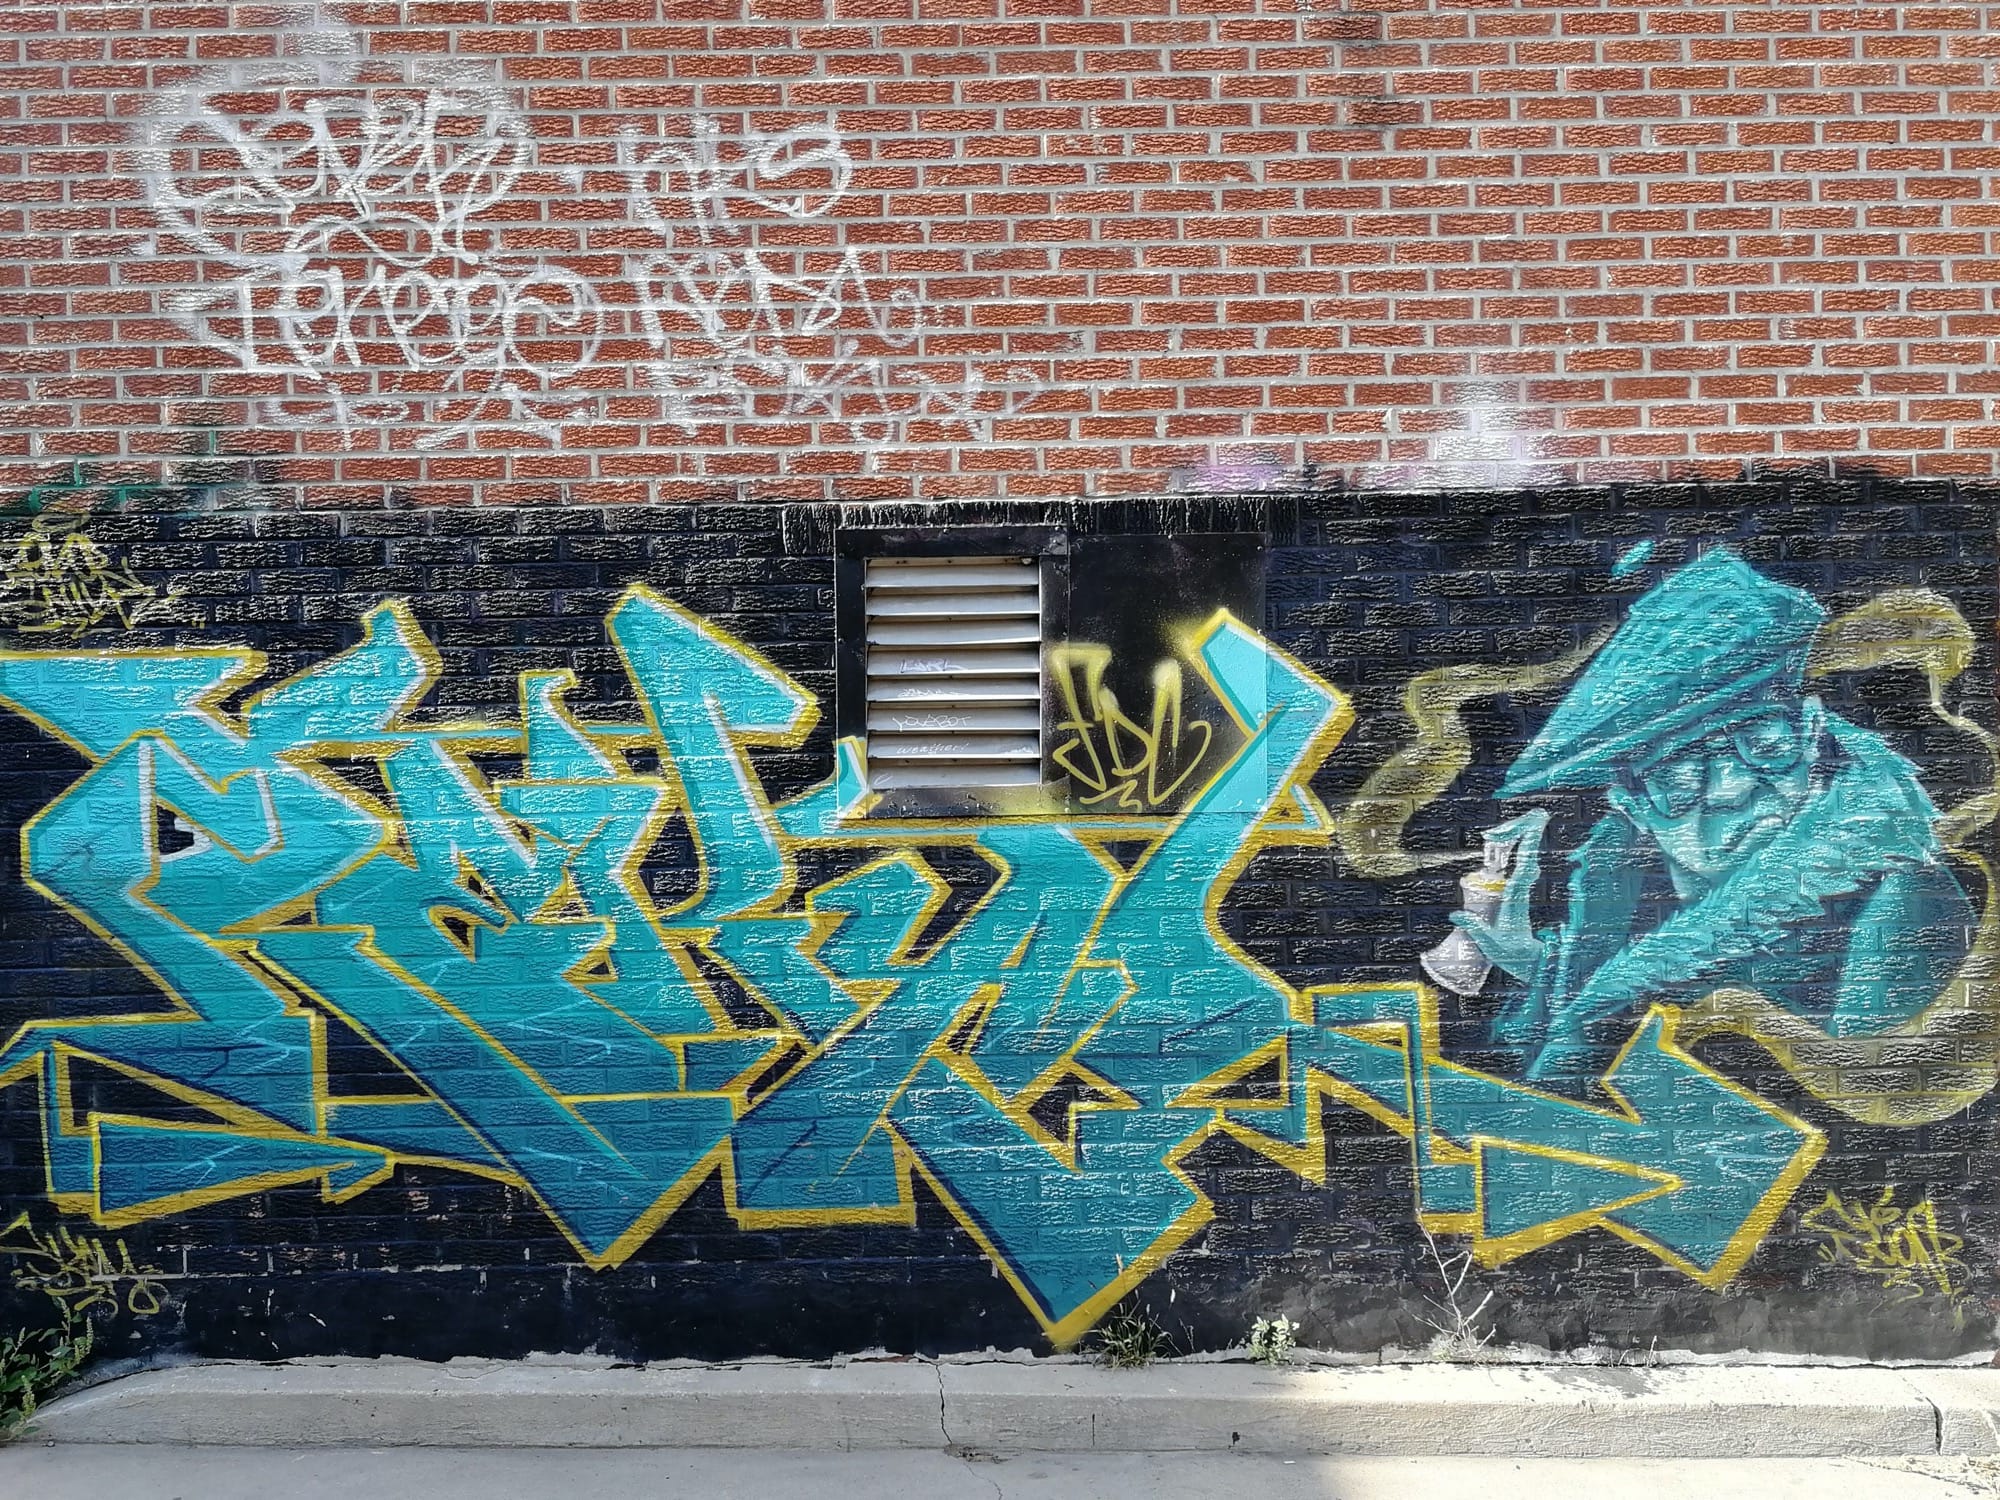 Graffiti 2387  captured by Rabot in Toronto Canada